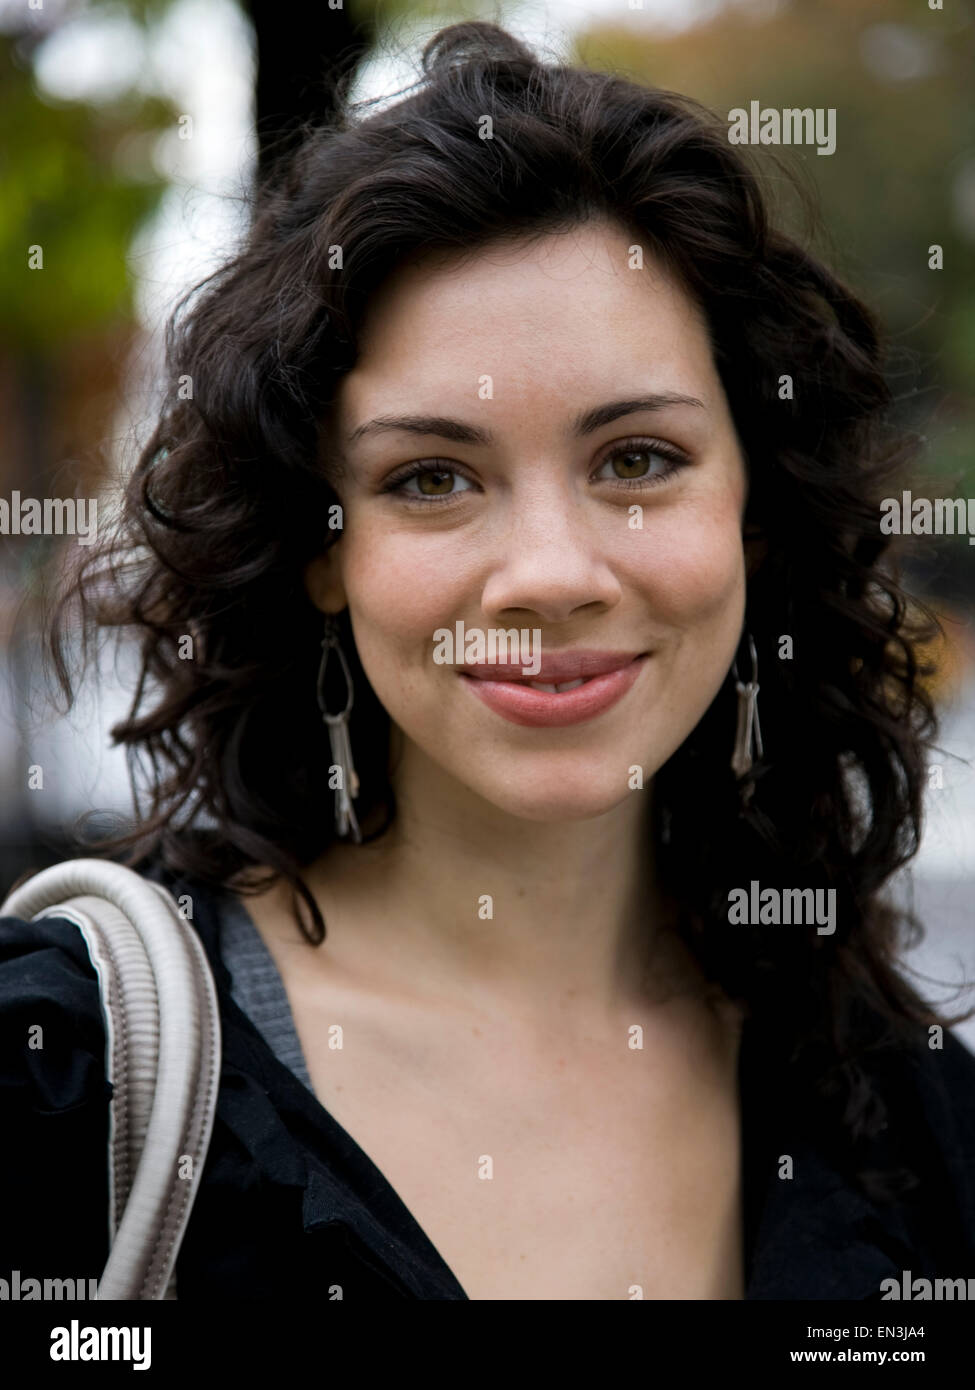 USA, New York, Manhattan, Greenwich Village, Portrait of smiling young woman Banque D'Images